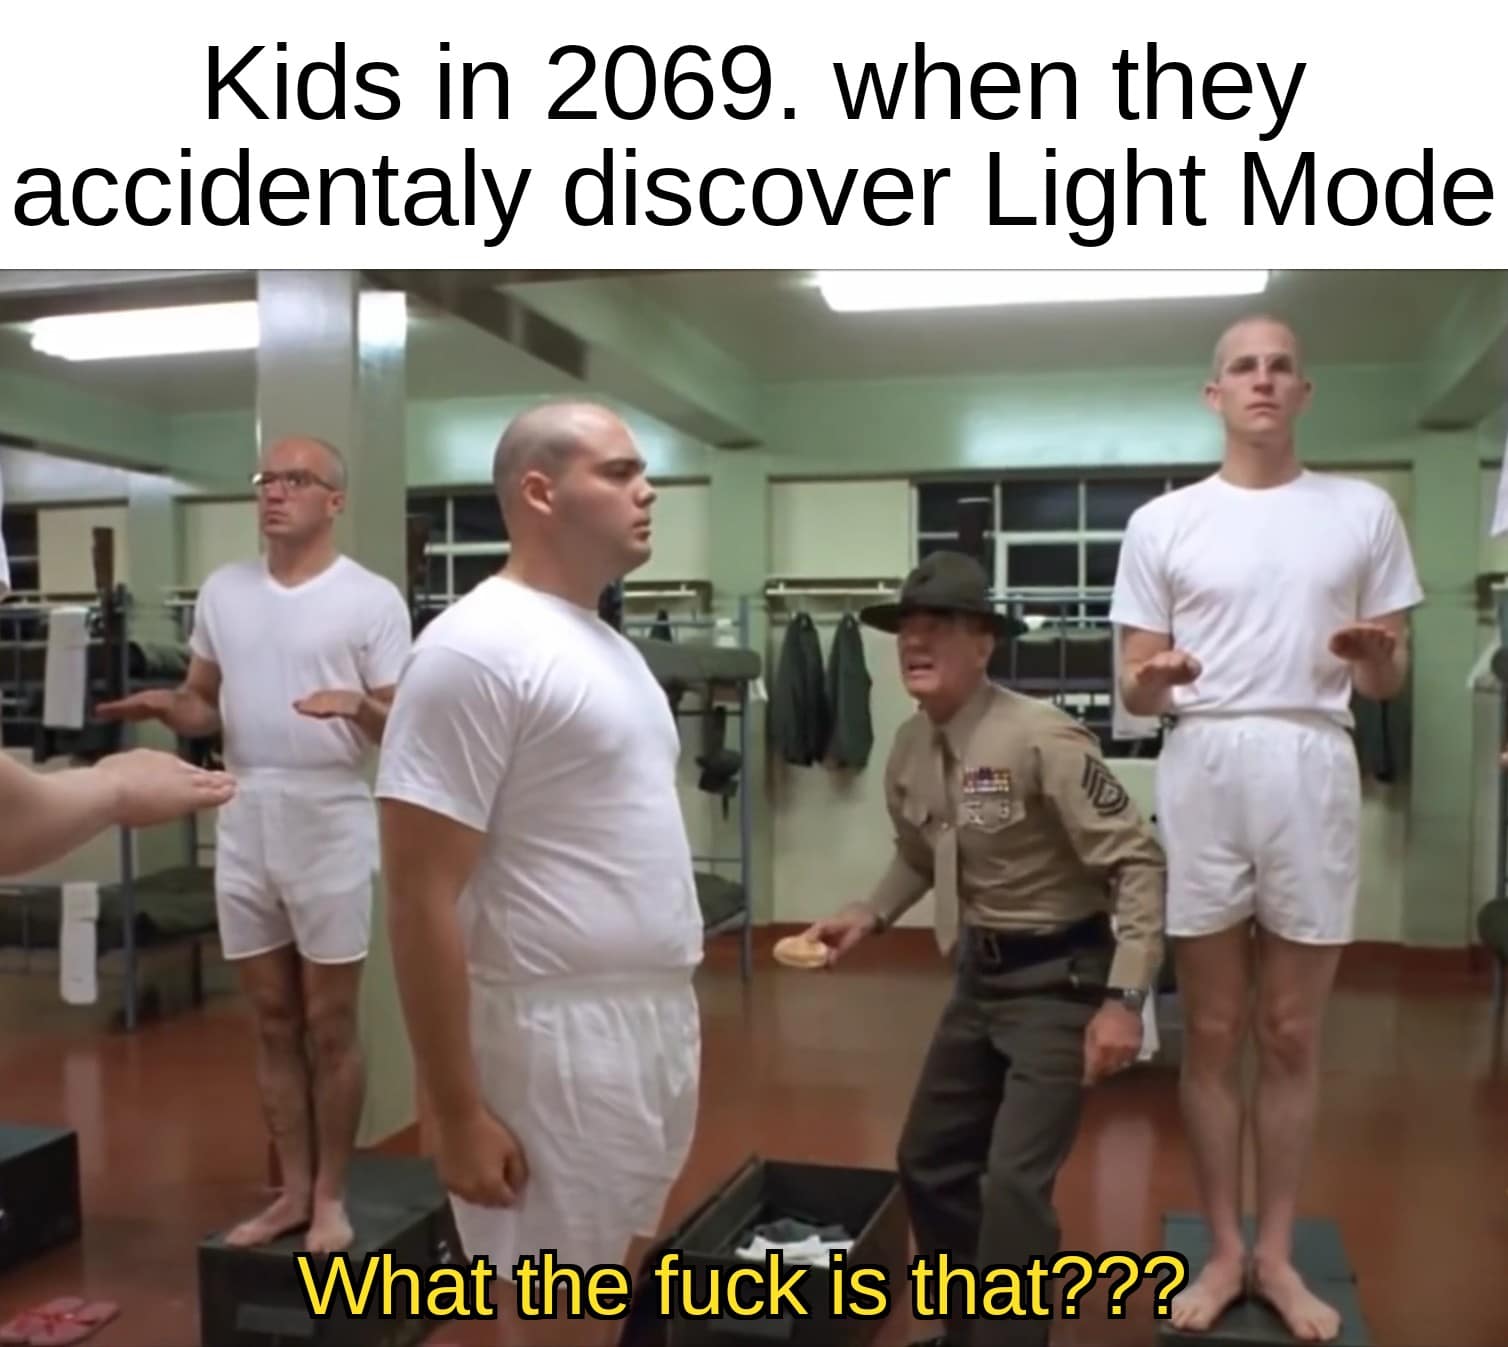 Dank, Sir, Private Pyle, Reddit, LightMode, Metal Jacket Dank Memes Dank, Sir, Private Pyle, Reddit, LightMode, Metal Jacket text: Kids in 2069. when they accidentaly discover Light Mode What the fuck is that??? 